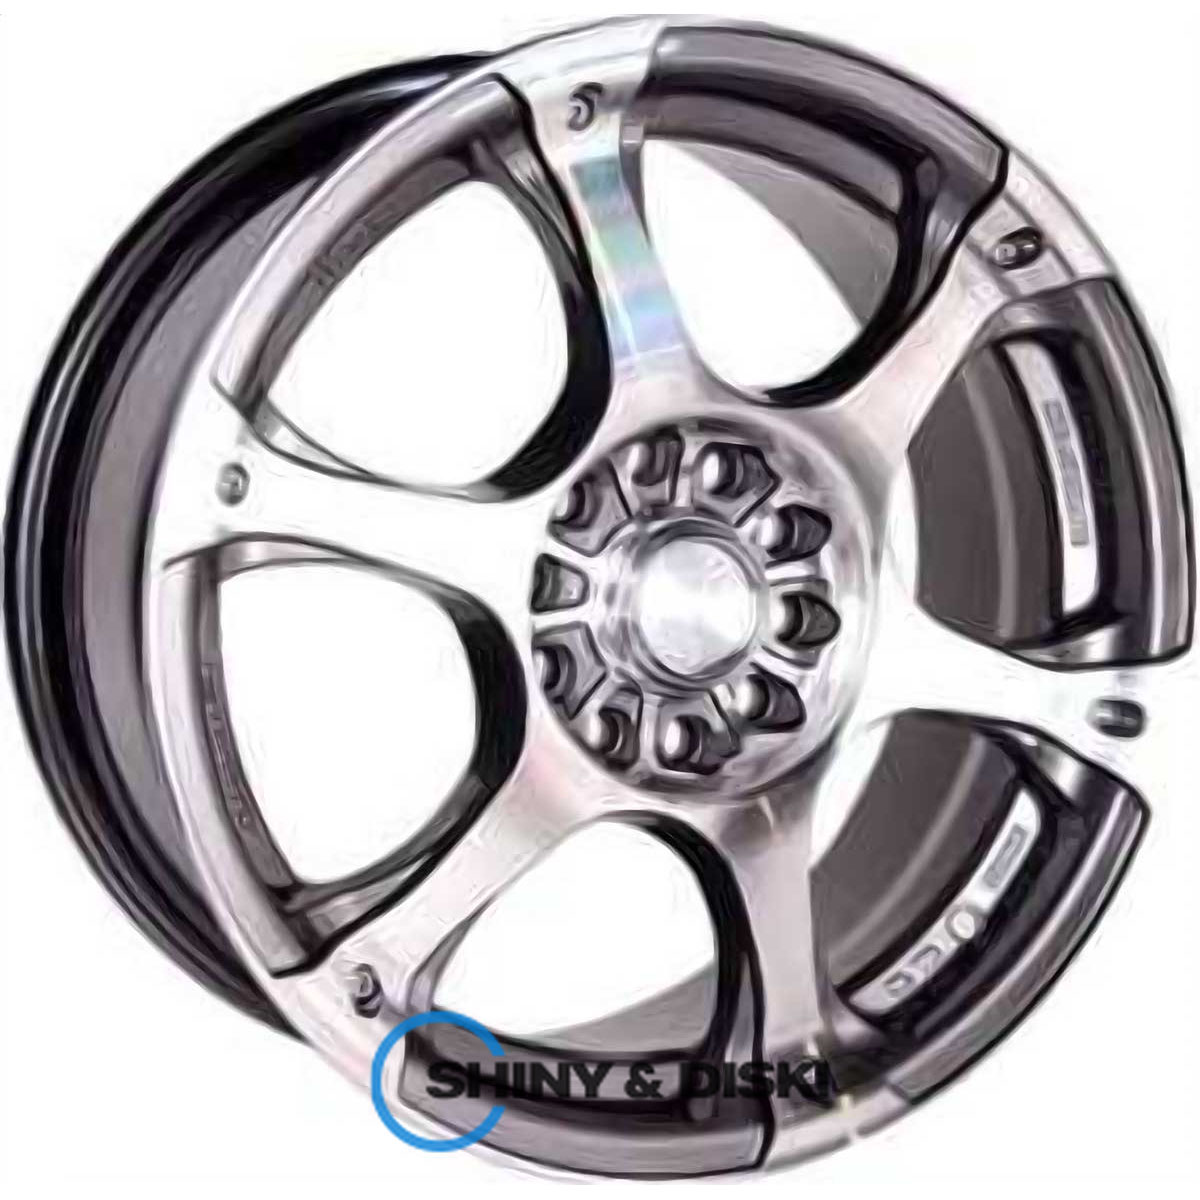 rs tuning h-245 gmfp r17 w7 pcd10x108/112 et40 dia73.1